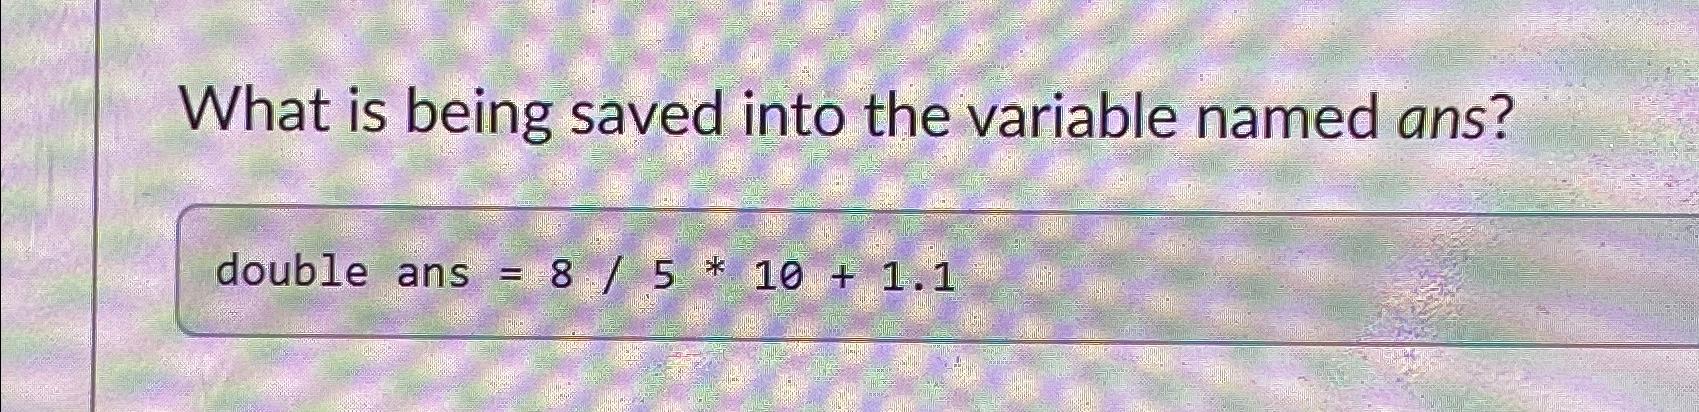 What is being saved into the variable named ans? double ans = 8/5 * 10 + 1.1